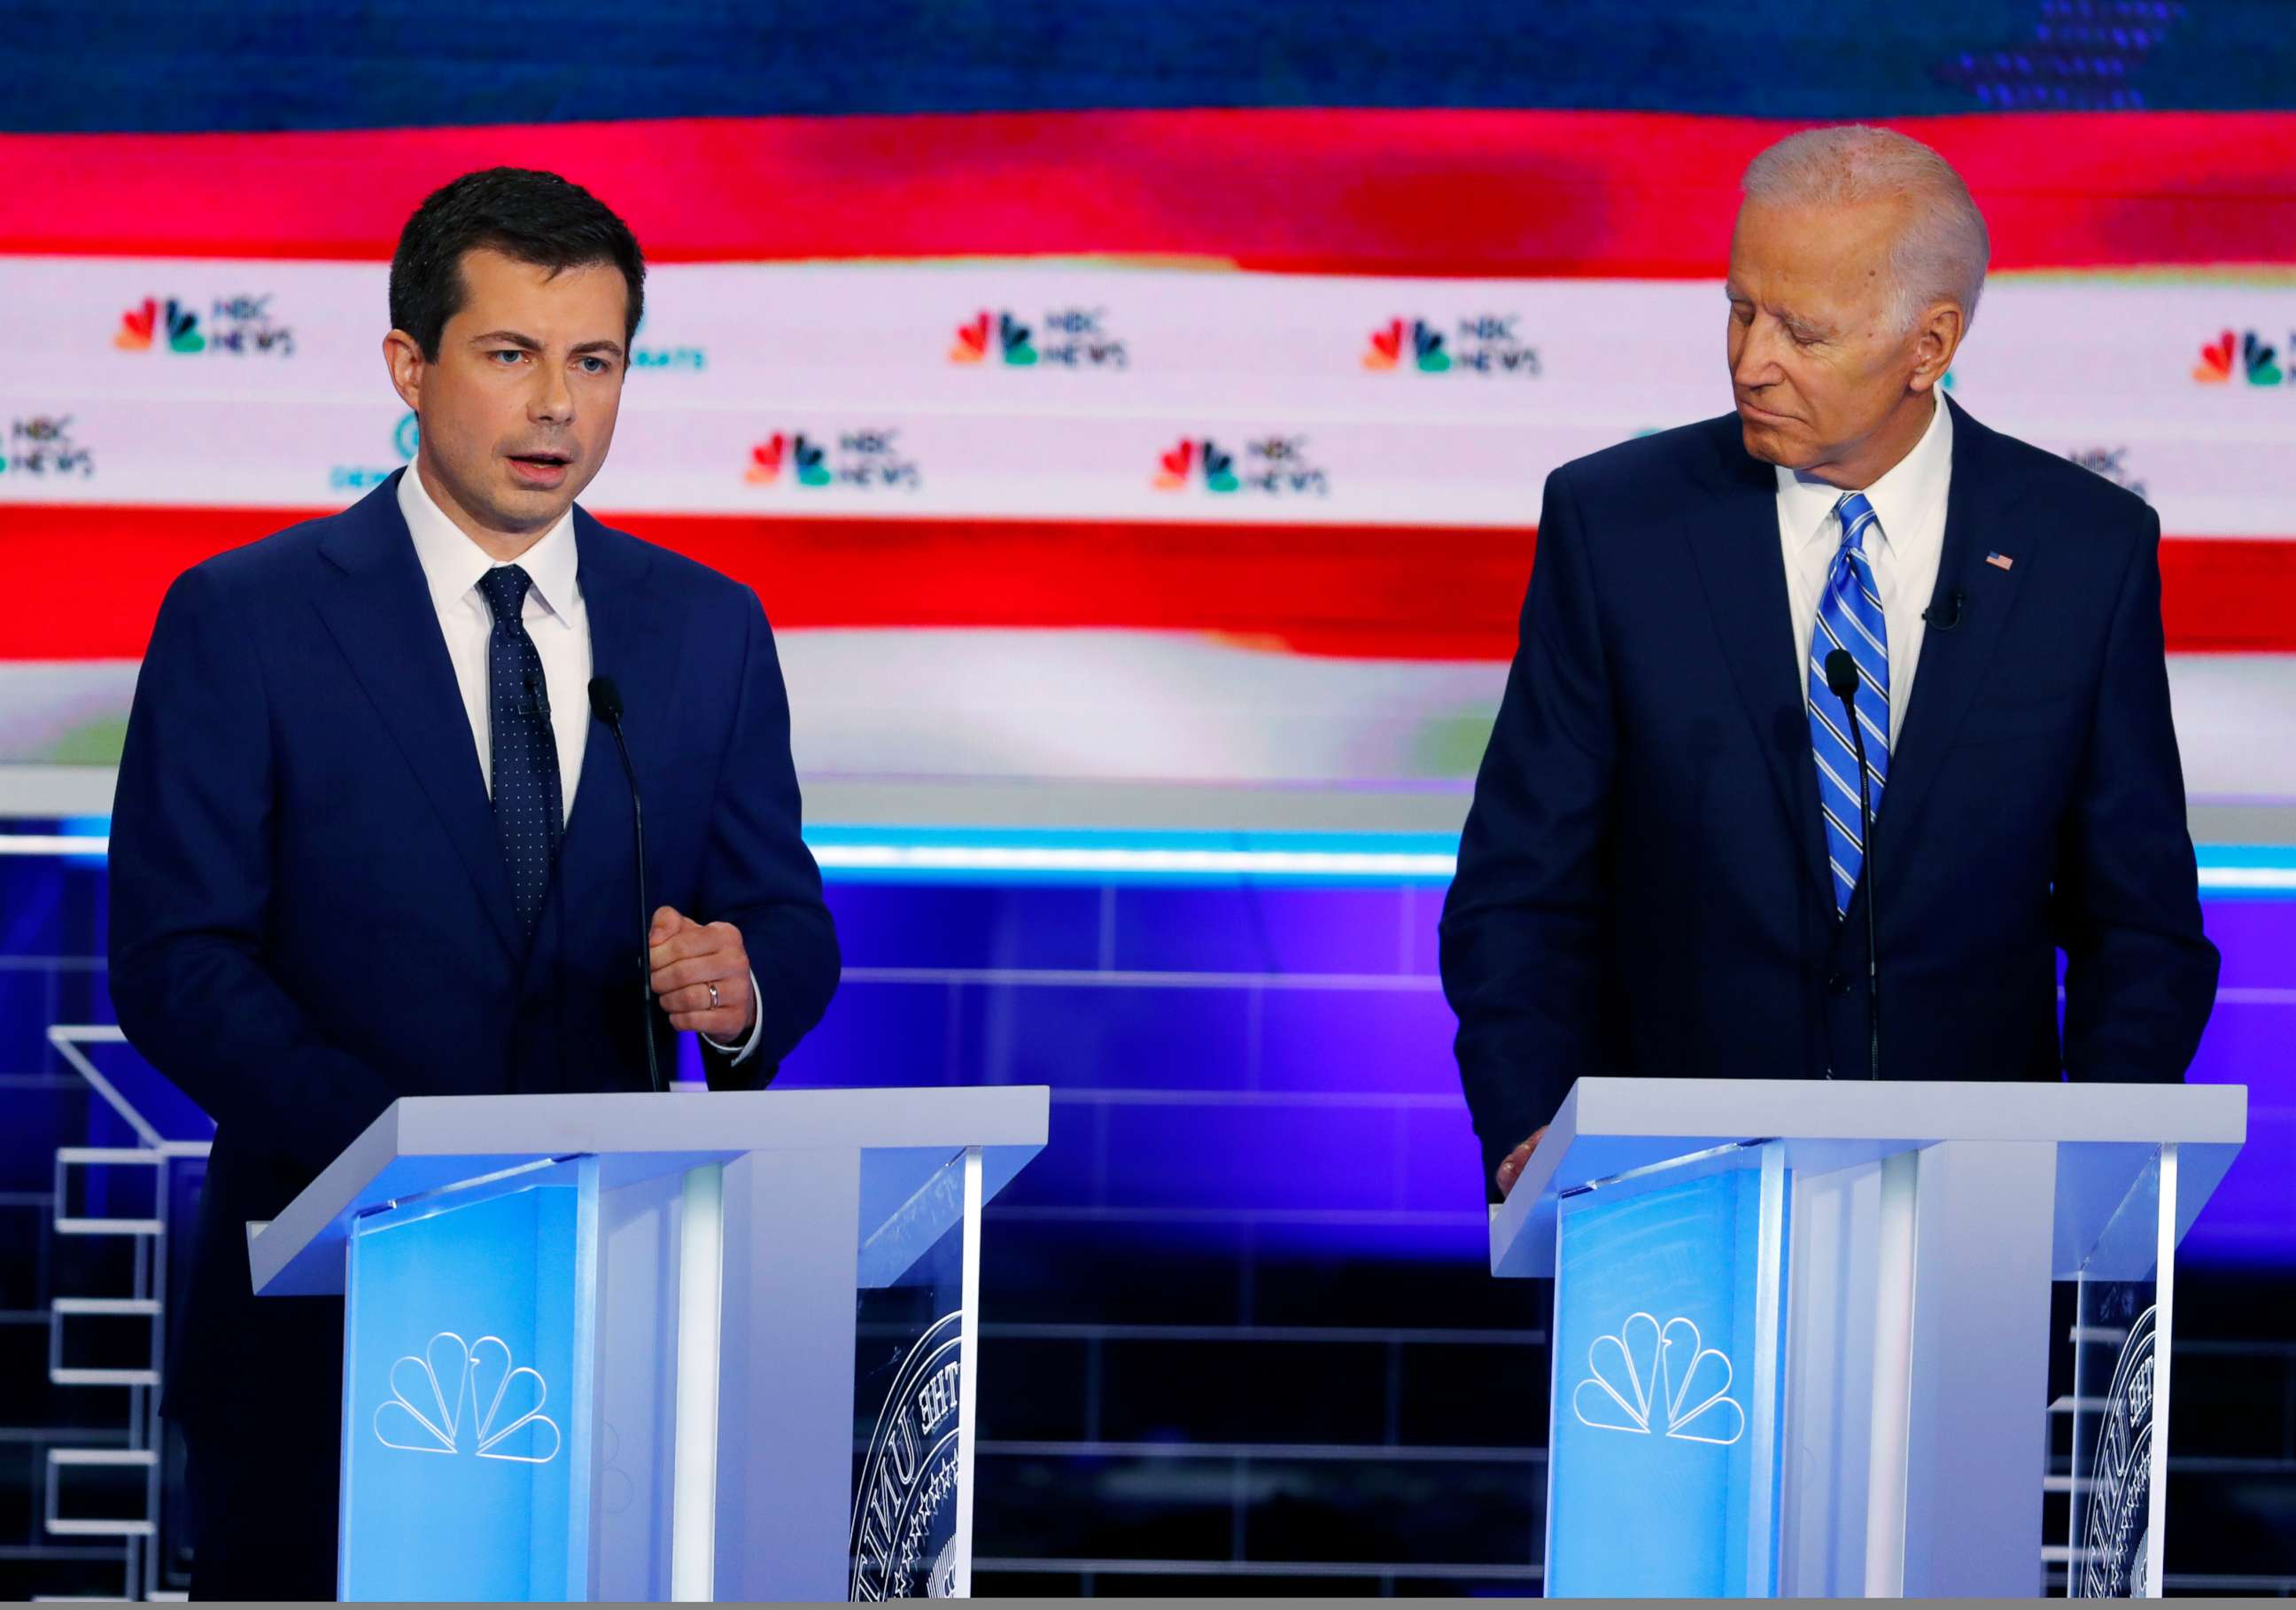 PHOTO: Pete Buttigieg and Joe Biden participate in the second night of the first 2020 democratic presidential debate at the Adrienne Arsht Center for the Performing Arts in Miami, June 27, 2019.